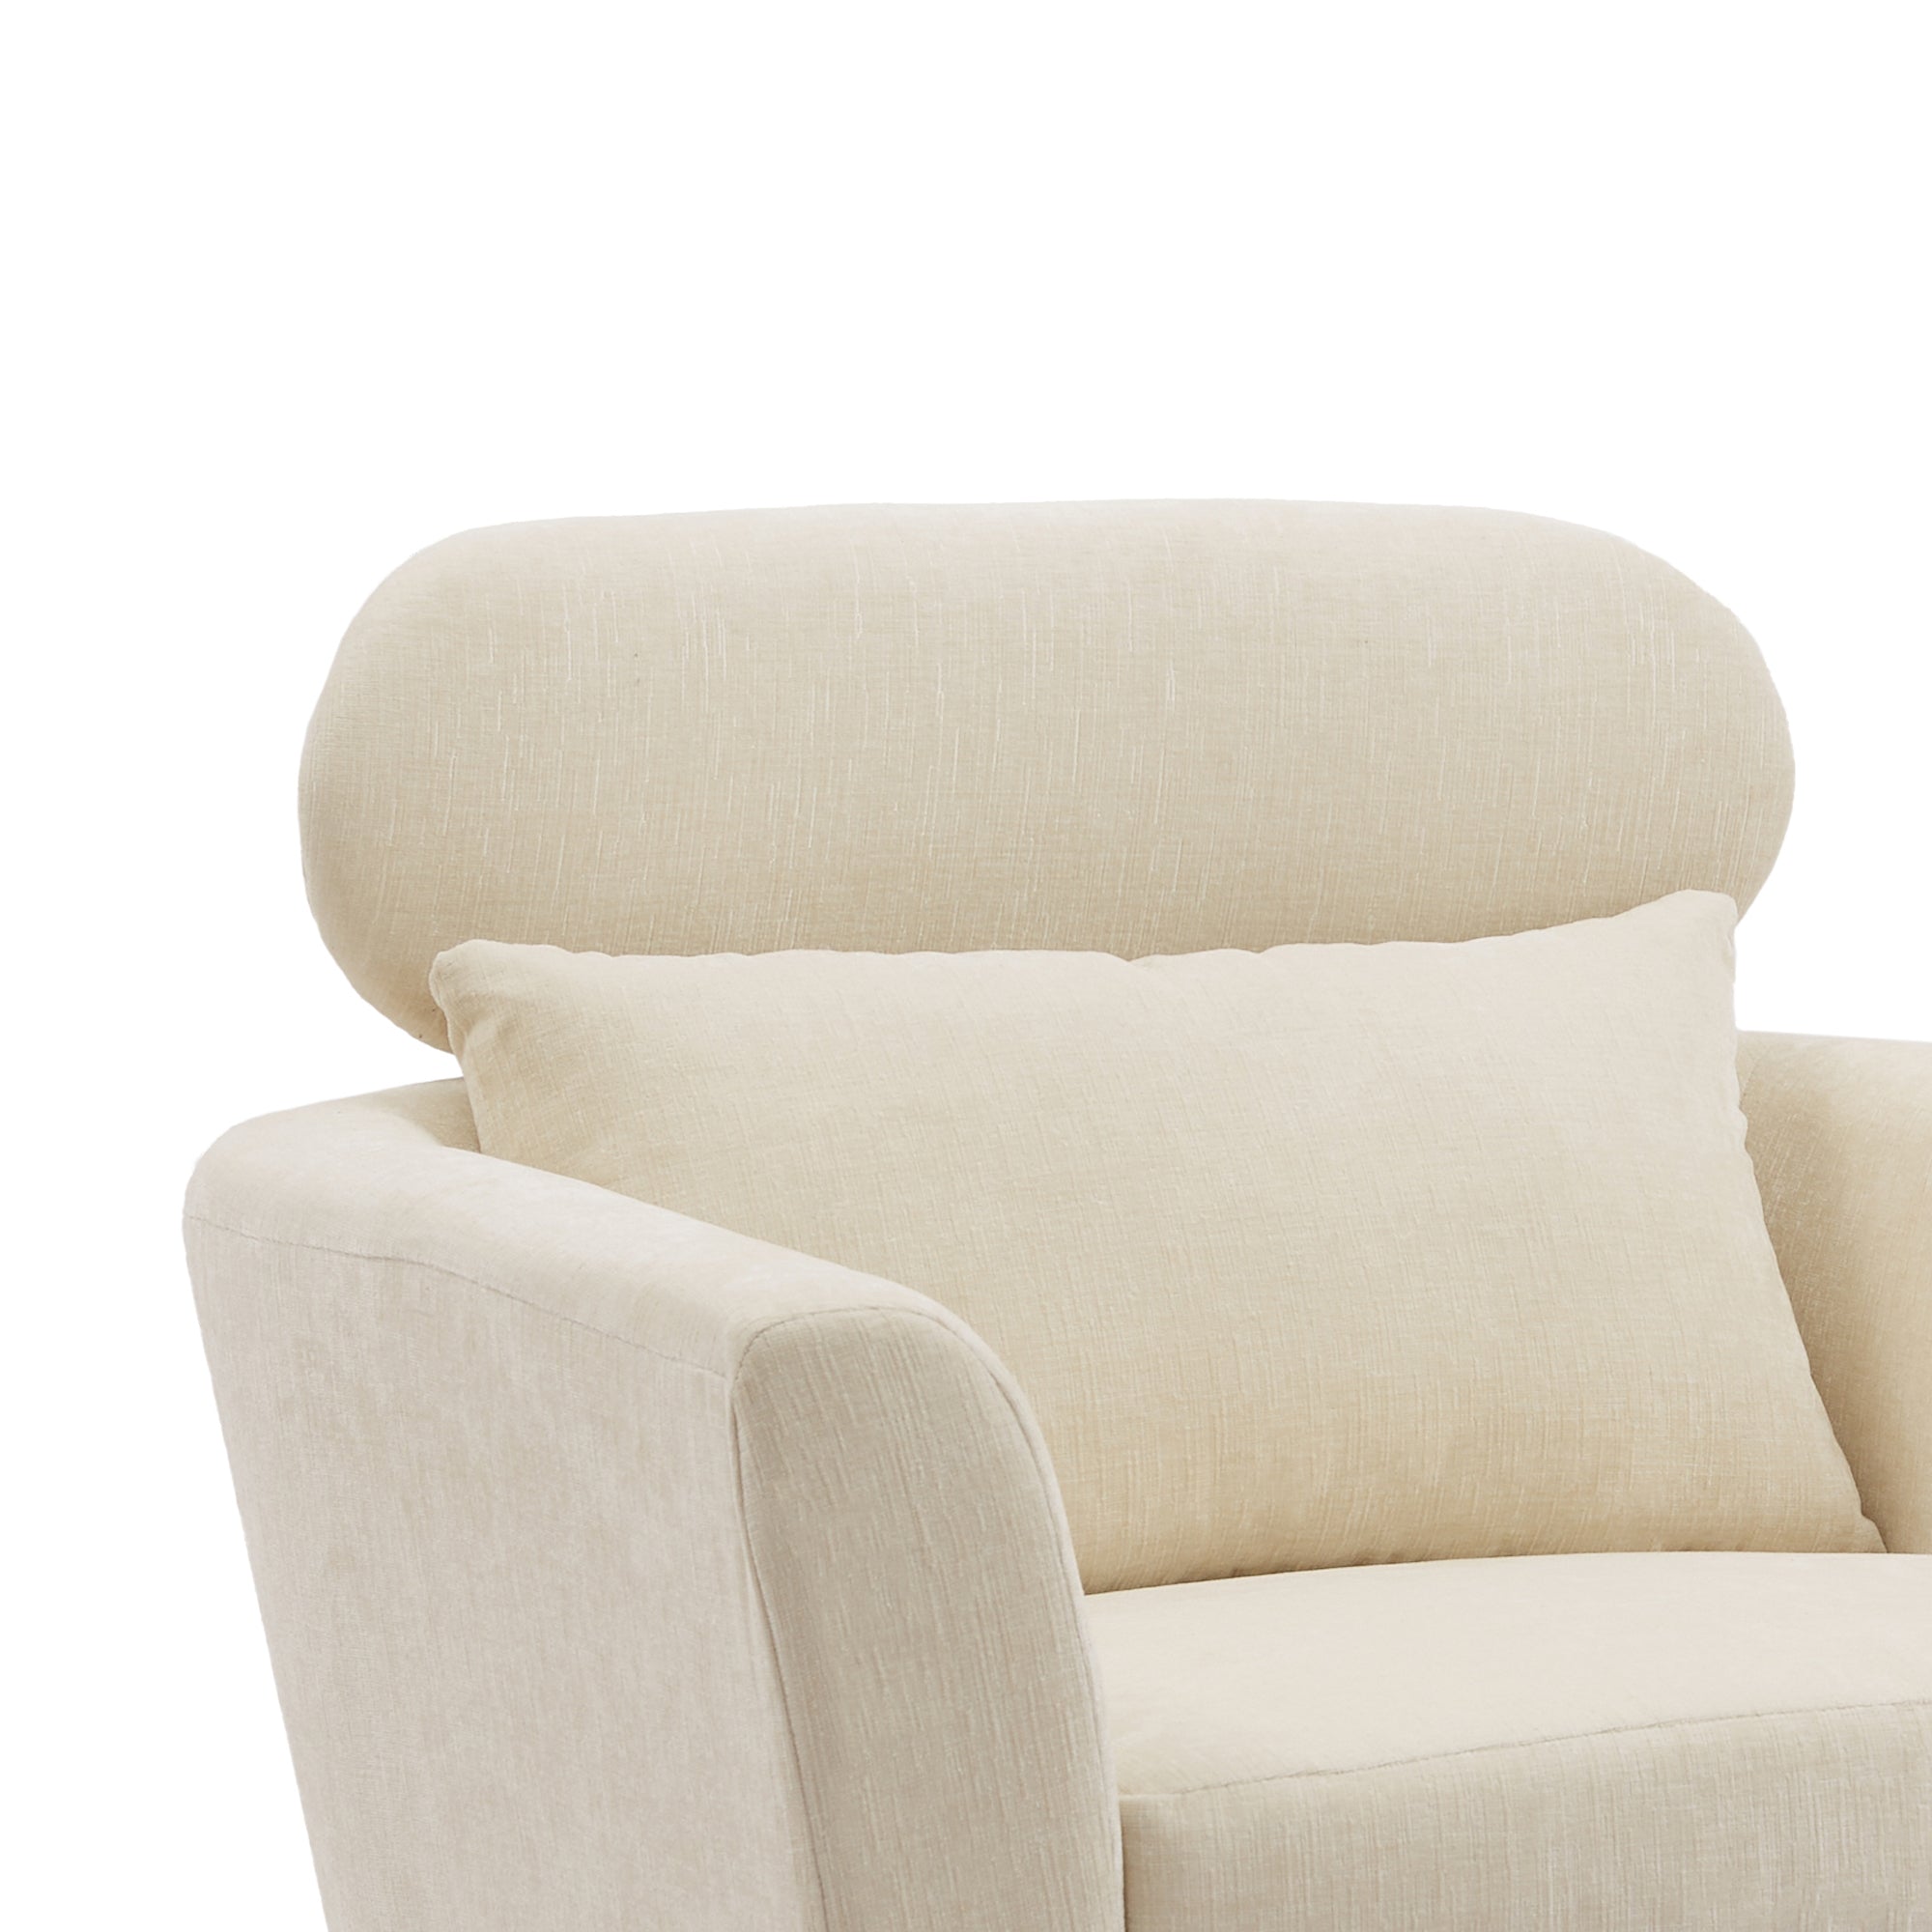 Chenille Upholstered Single Sofa Leisure Club Chair